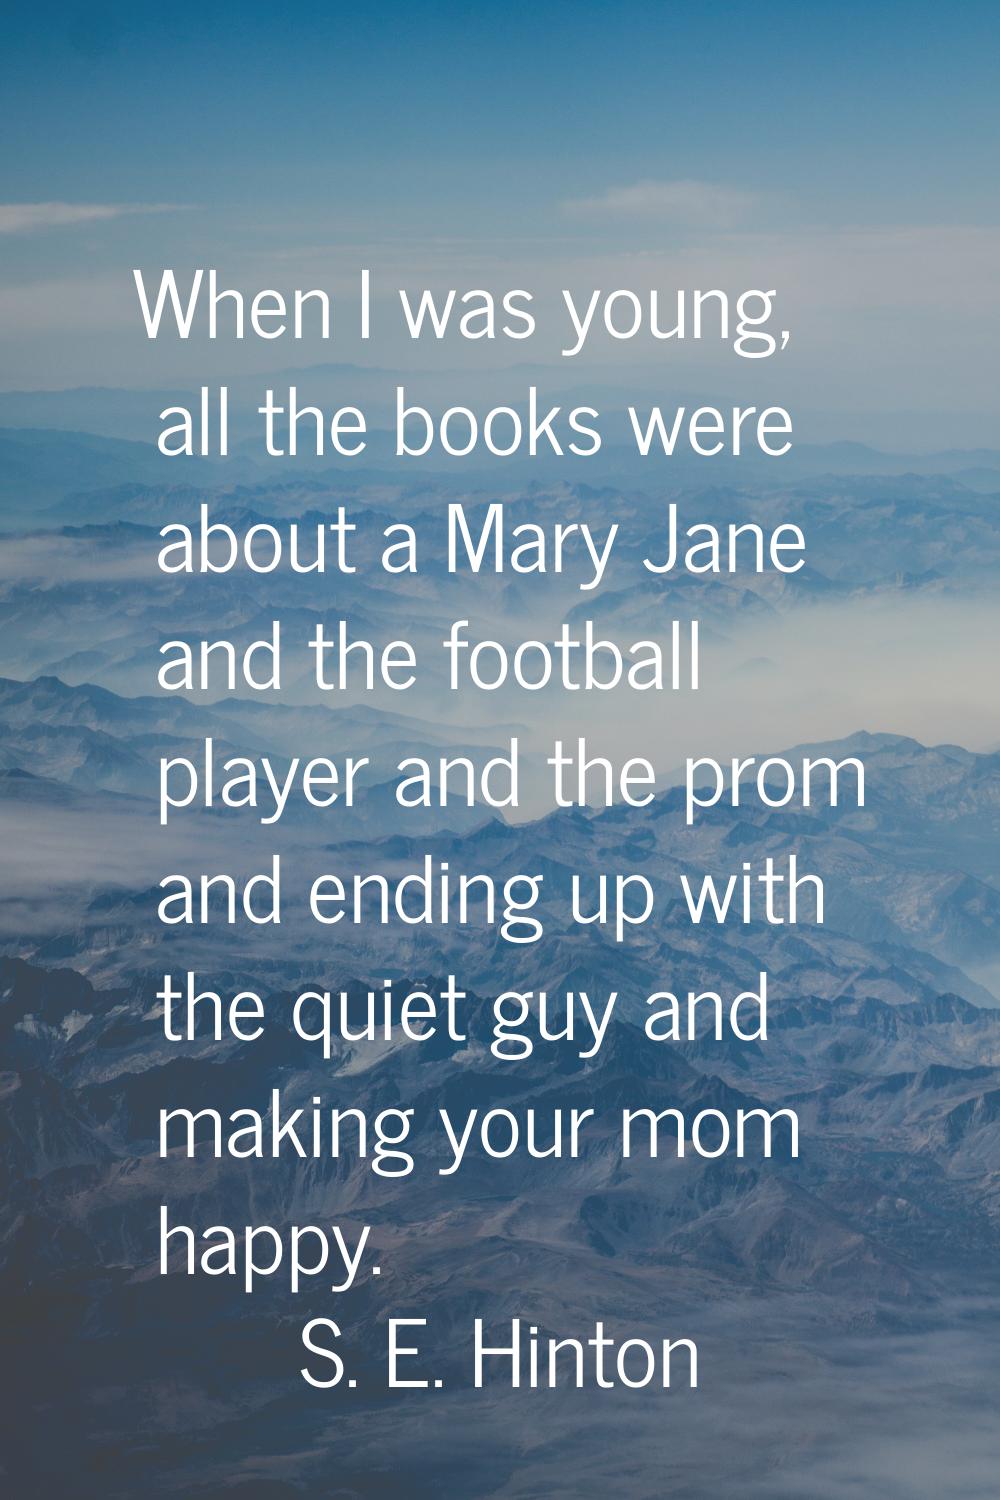 When I was young, all the books were about a Mary Jane and the football player and the prom and end